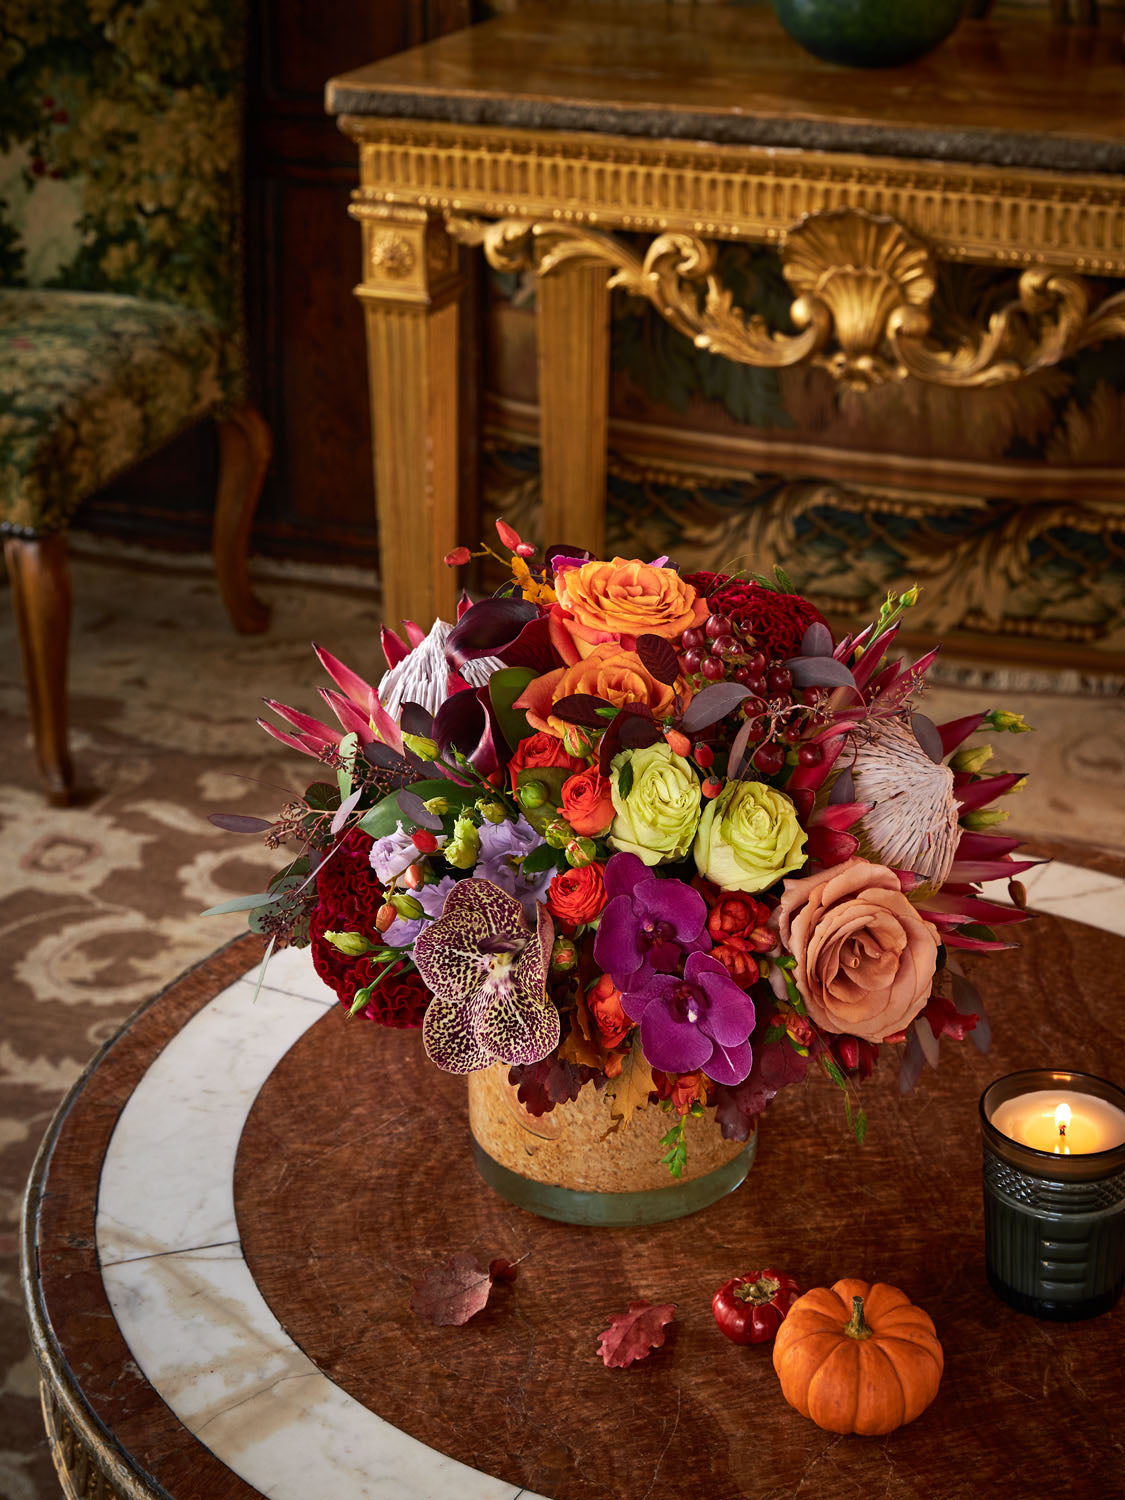 “Ode To Autumn” Low Table Arrangement